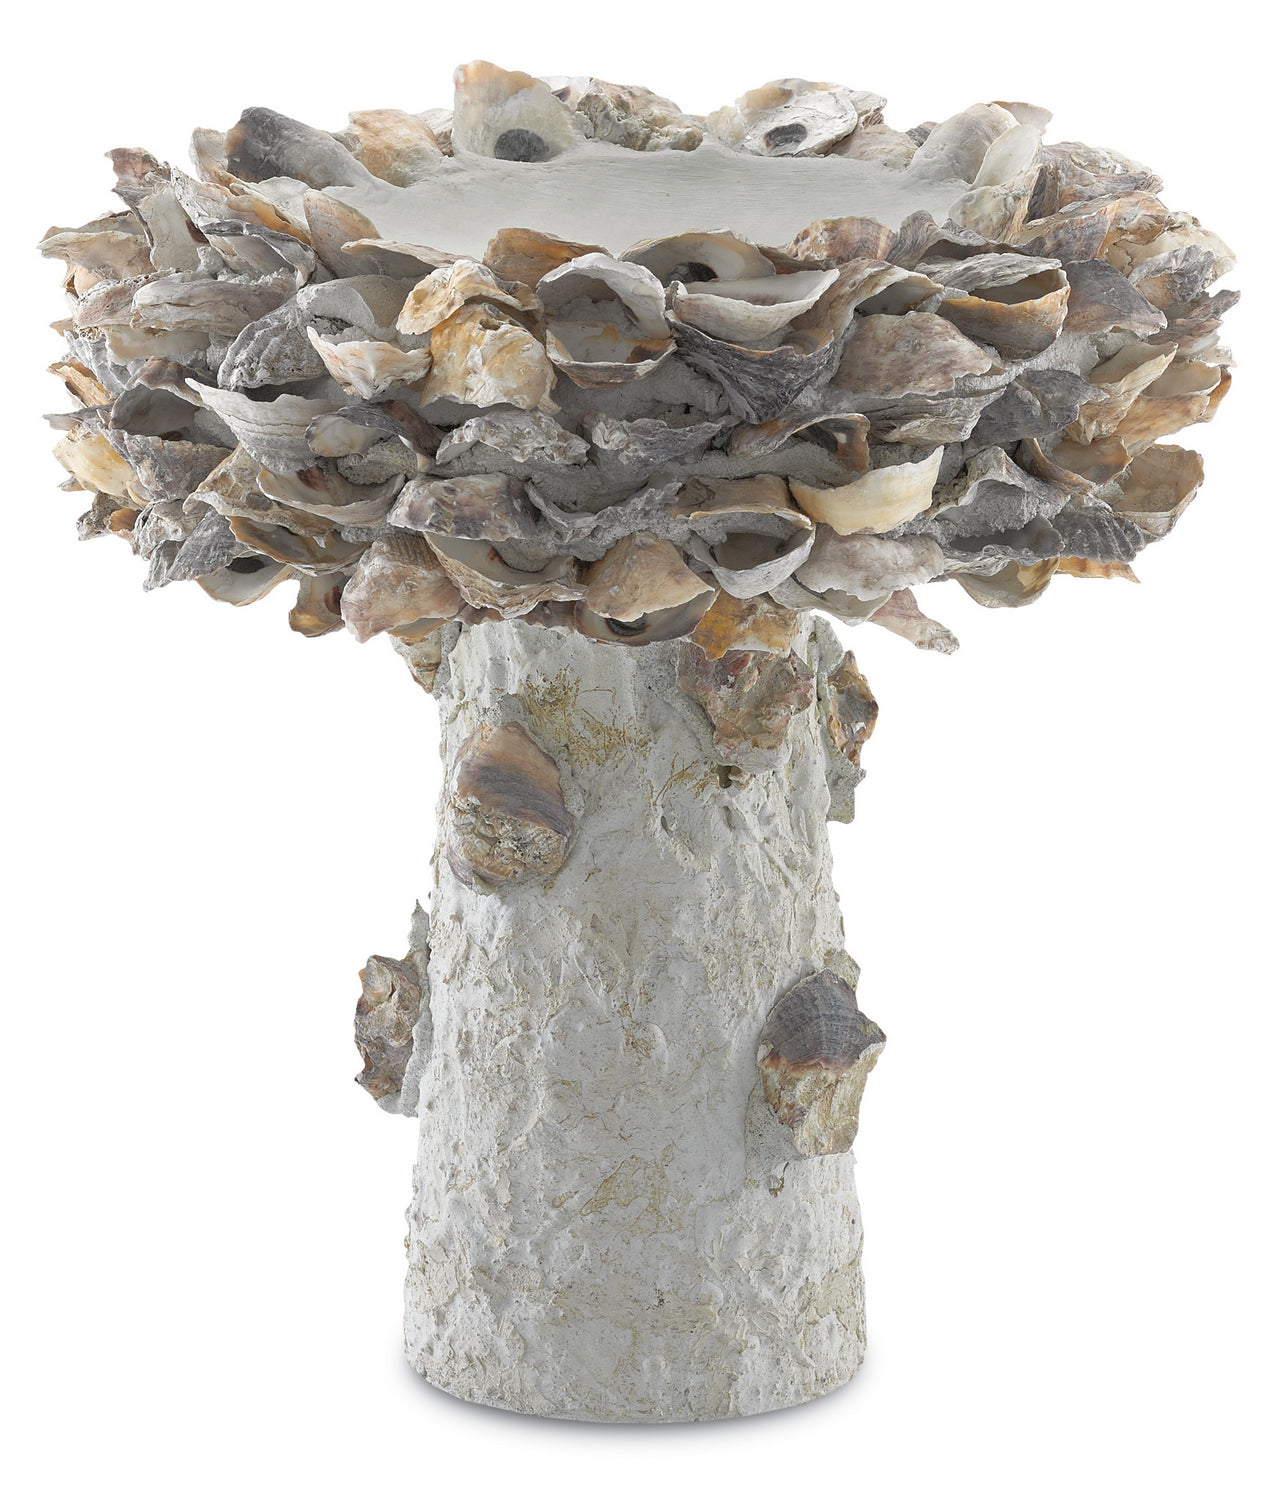 Shell Bird Bath from the Oyster collection in Natural finish